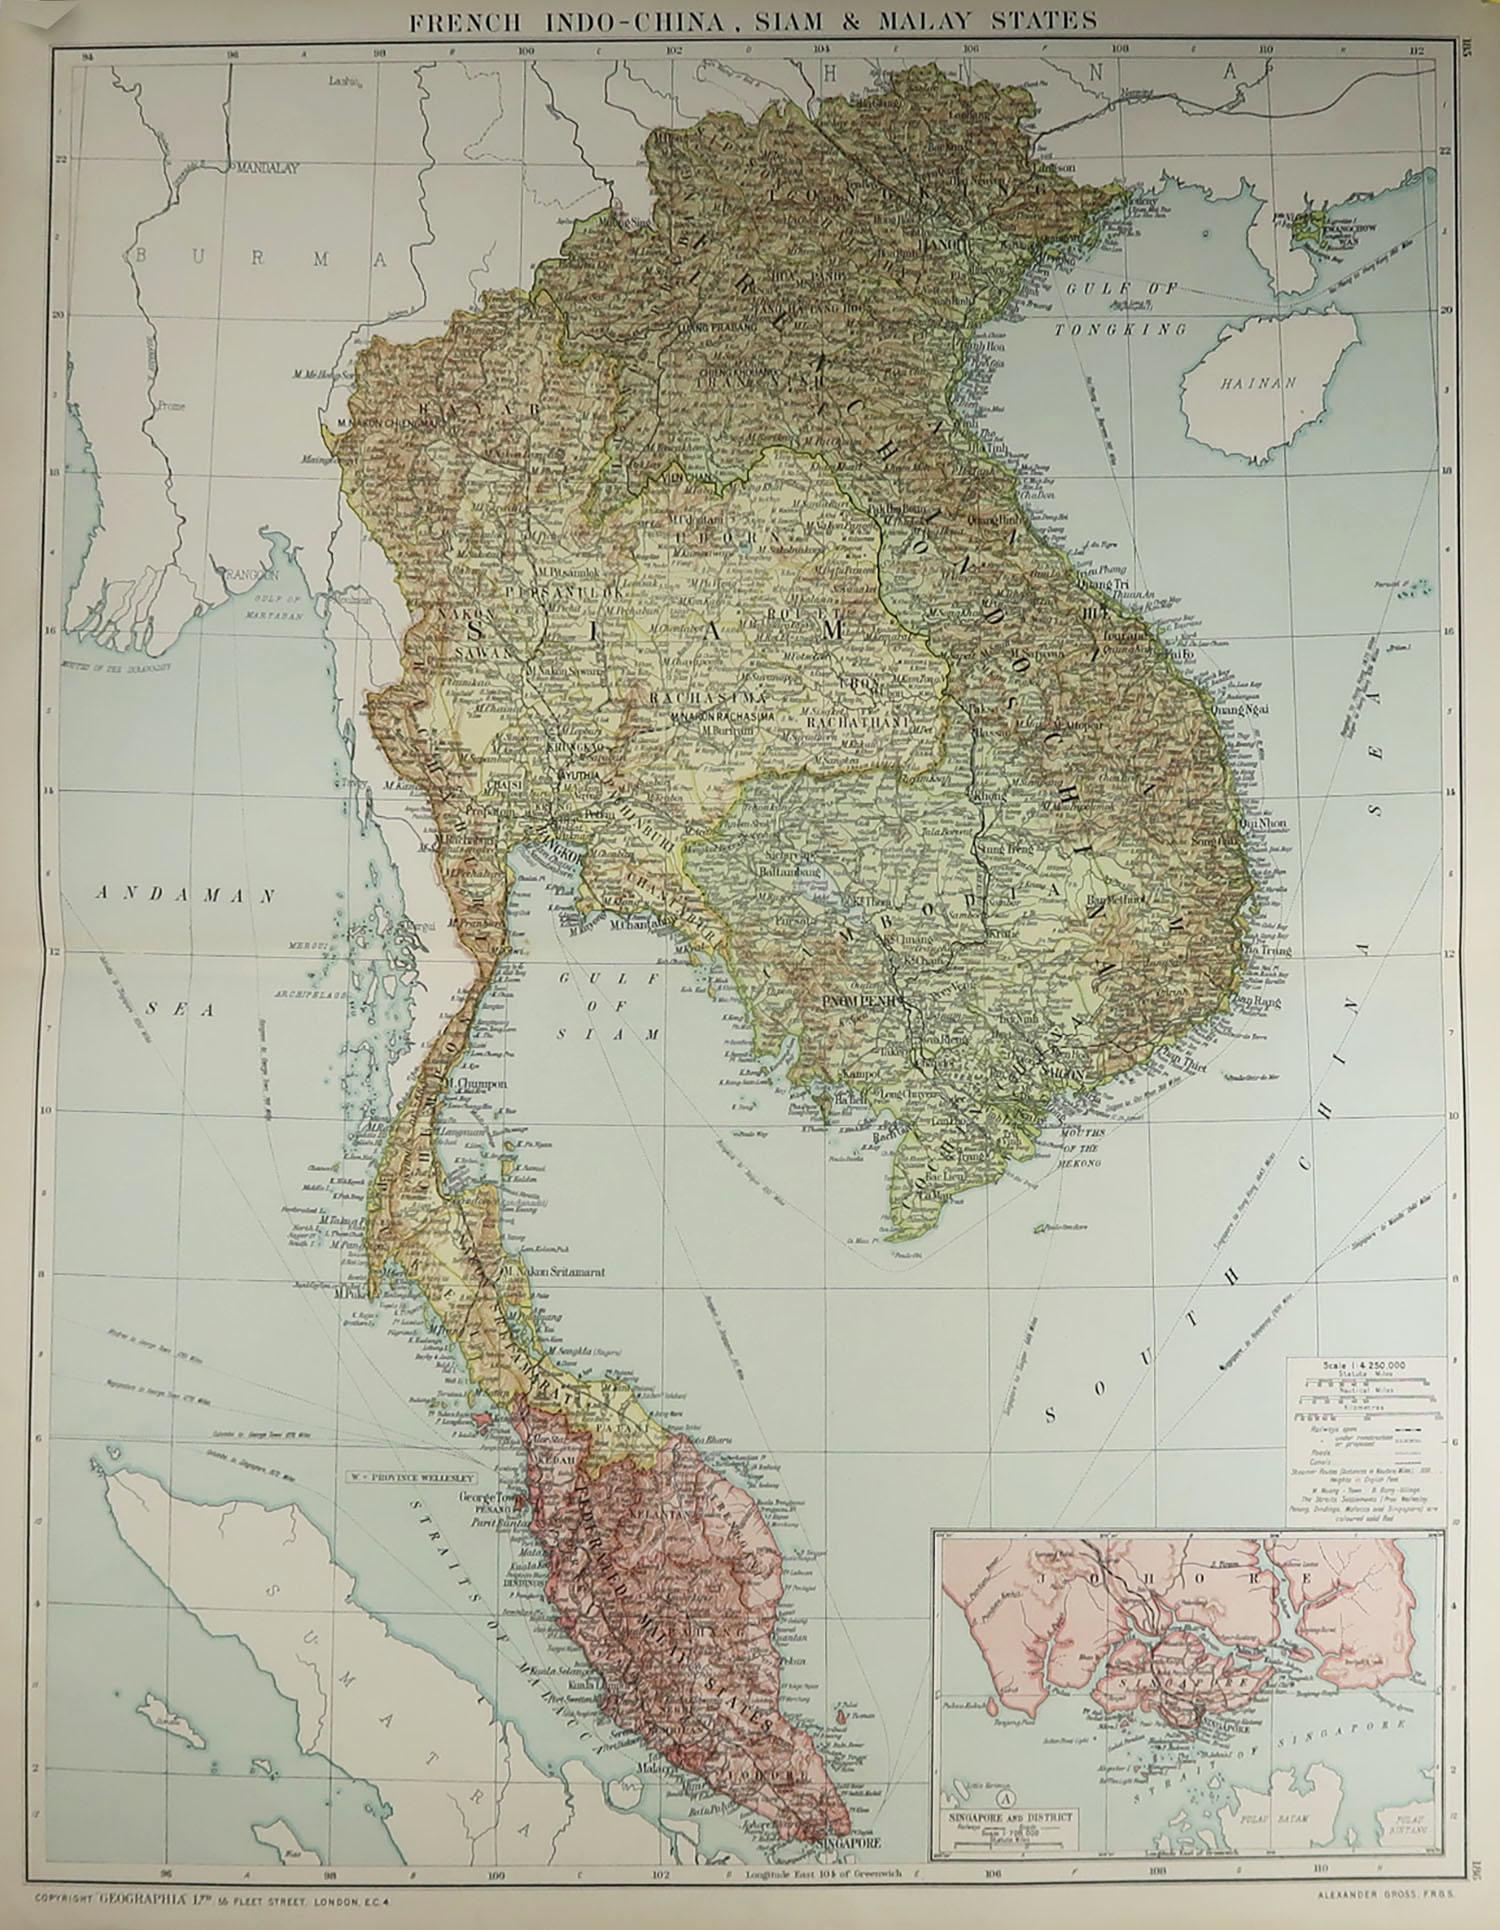 Great map of South East Asia 

Original color. Good condition

Published by Alexander Gross

Unframed.








